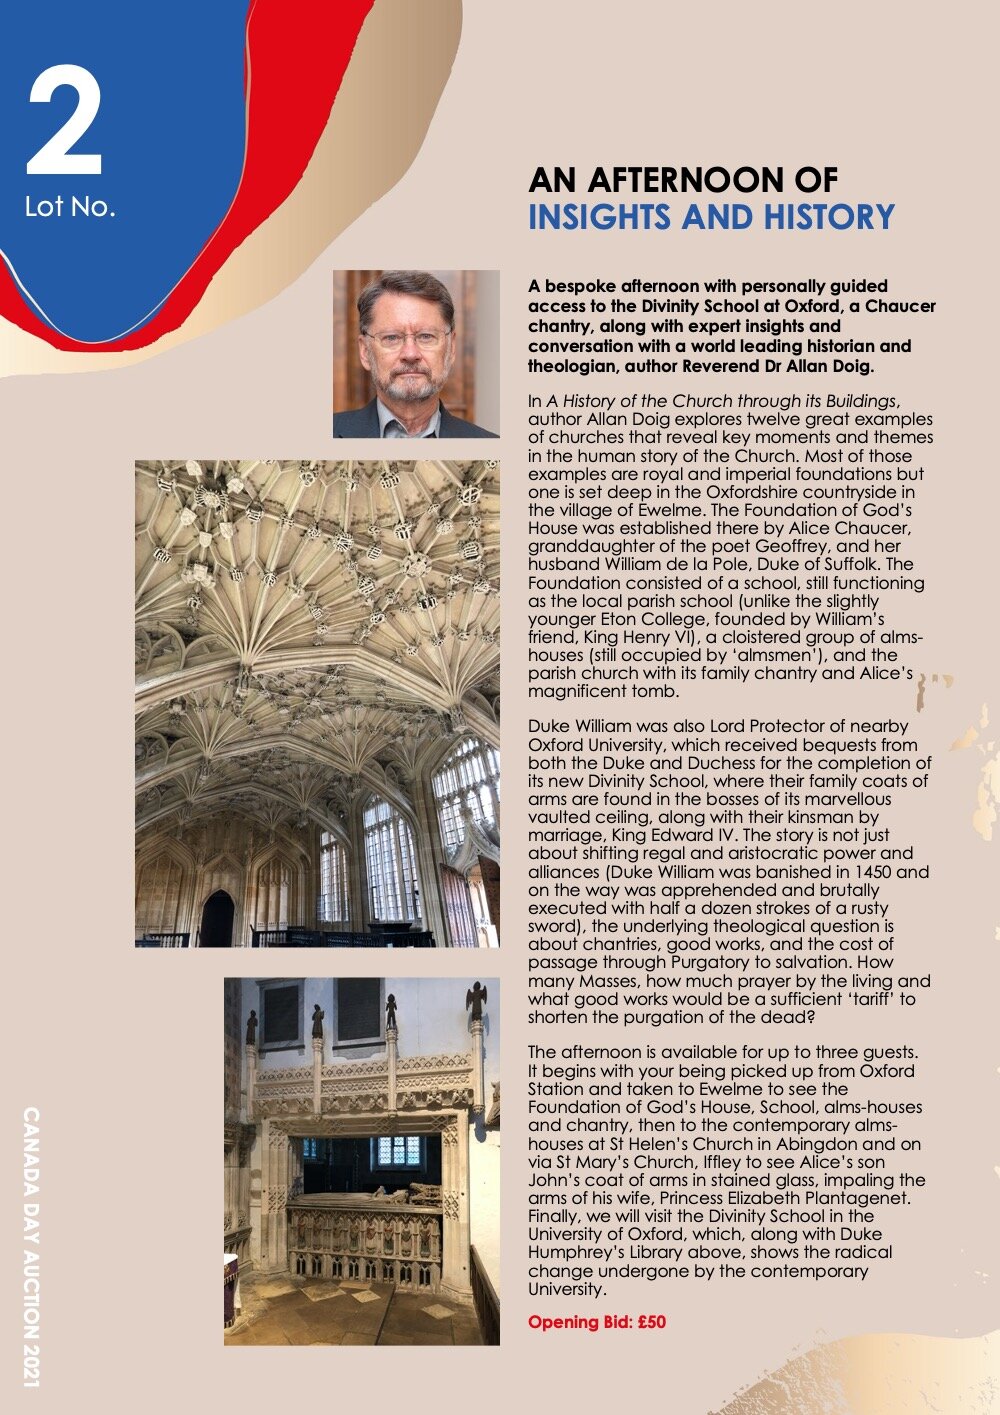  Lot 2:  AN AFTERNOON OF INSIGHTS AND HISTORY     A bespoke afternoon with personally guided access to the Divinity School at Oxford, a Chaucer chantry, along with expert insights and conversation with a world leading historian and theologian, author